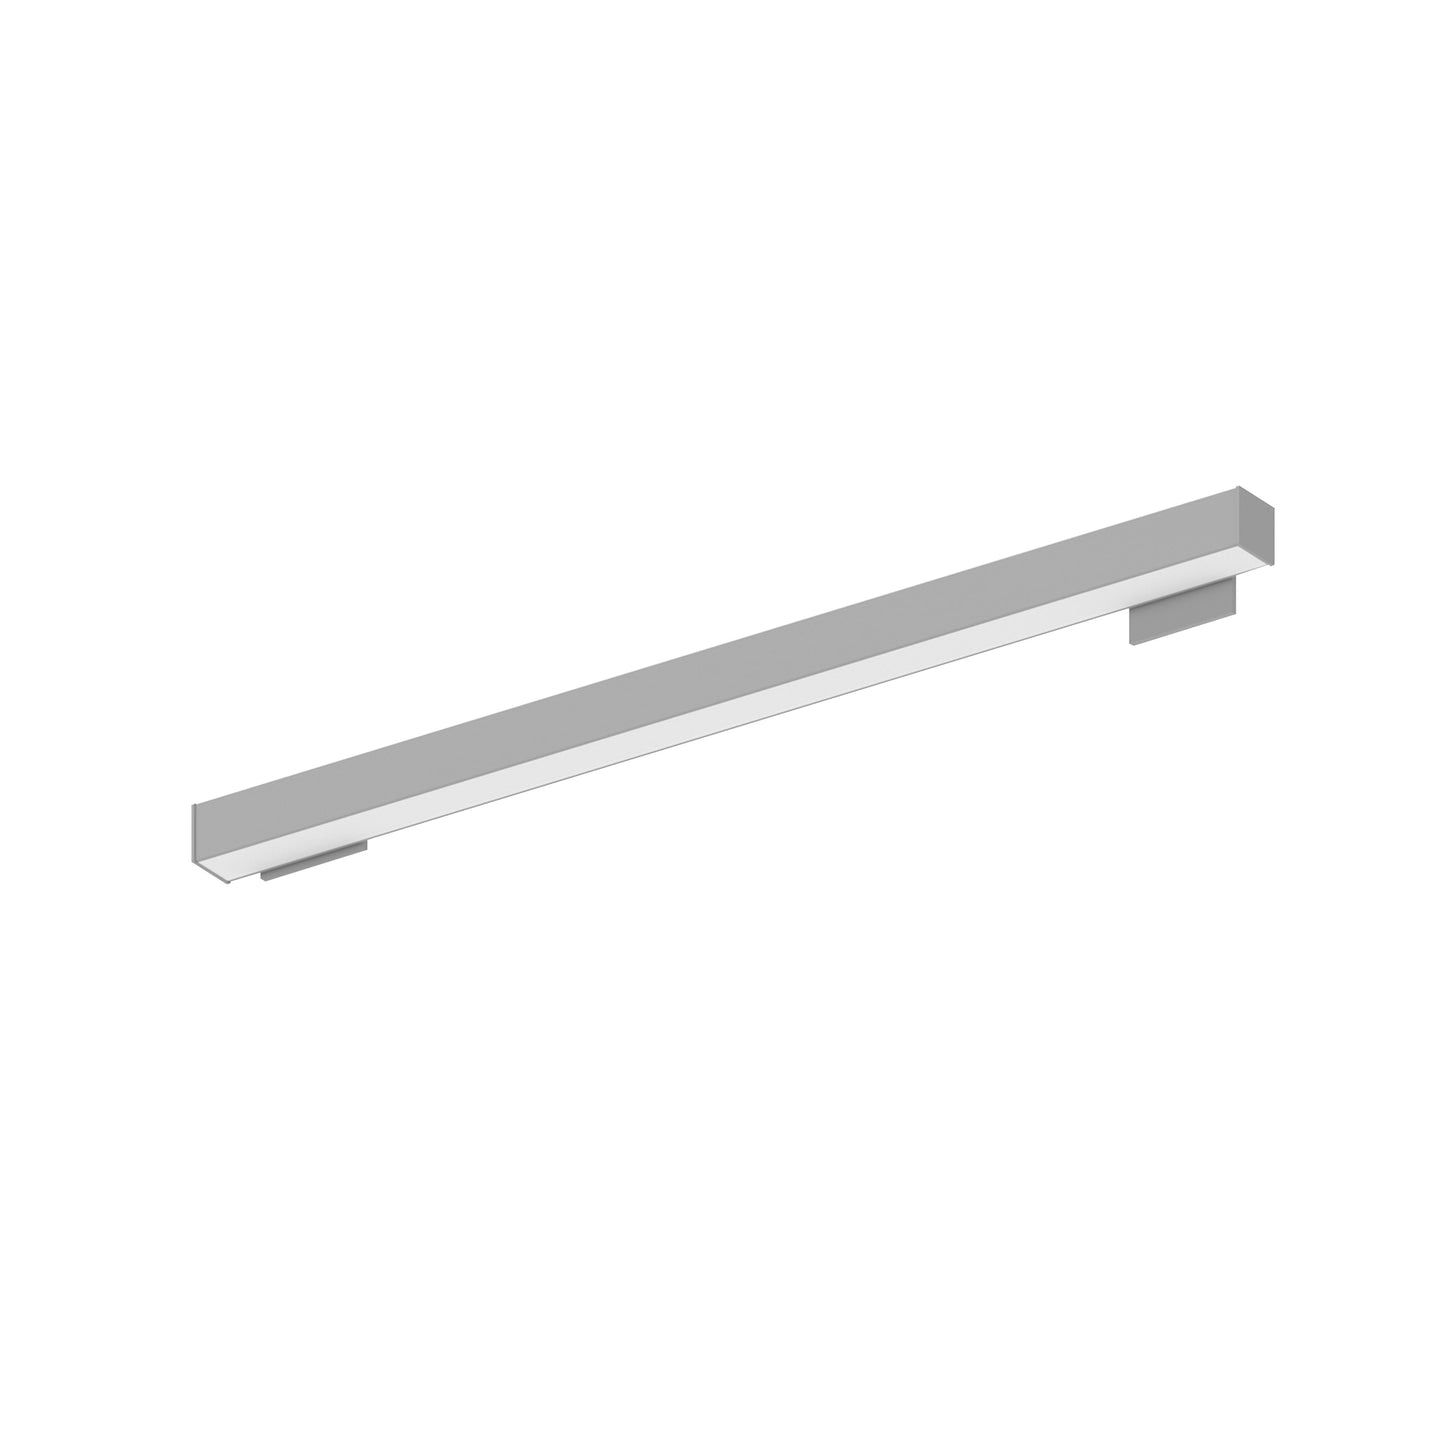 Nora Lighting 2' L-Line LED Wall Mount Linear, 2100lm / 4000K, 2"x4" Left Plate & 4"x4" Right Plate, Aluminum Finish   NWLIN-21040A/L2-R4